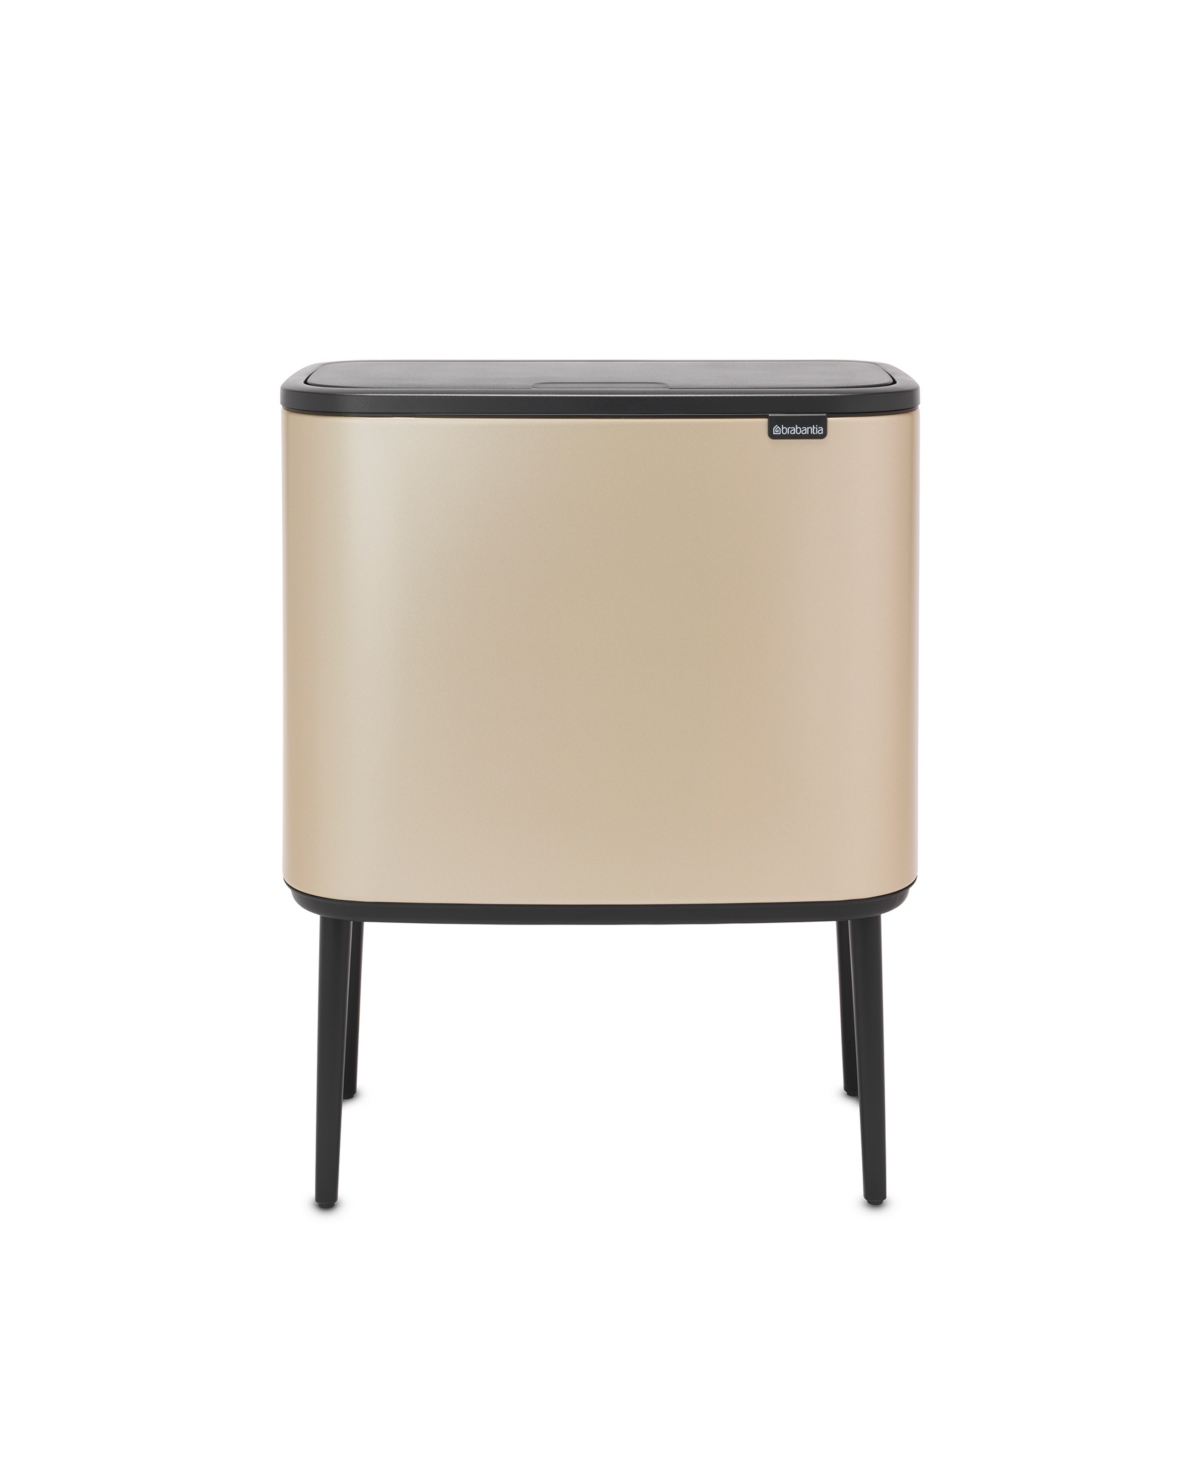 Bo Touch Top Dual Compartment Trash Can, 3 plus 6 Gallon, 11 plus 23 Liter - Metallic Gold